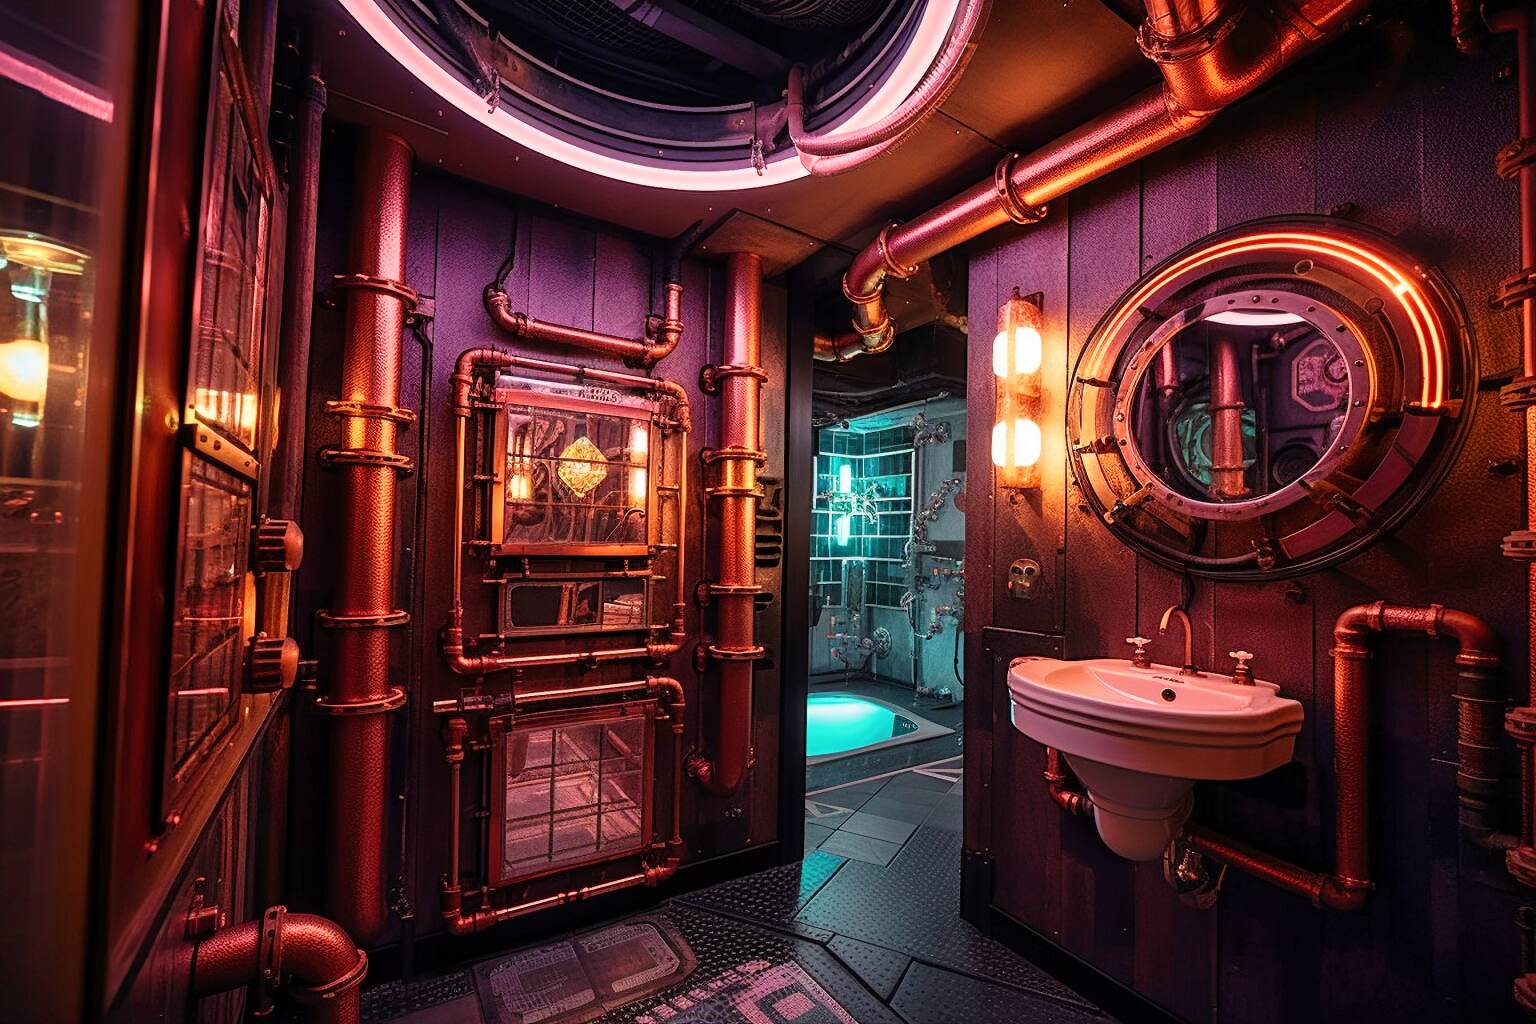 Bathroom With A Fusion Of Steampunk And Cyberpunk Aesthetics